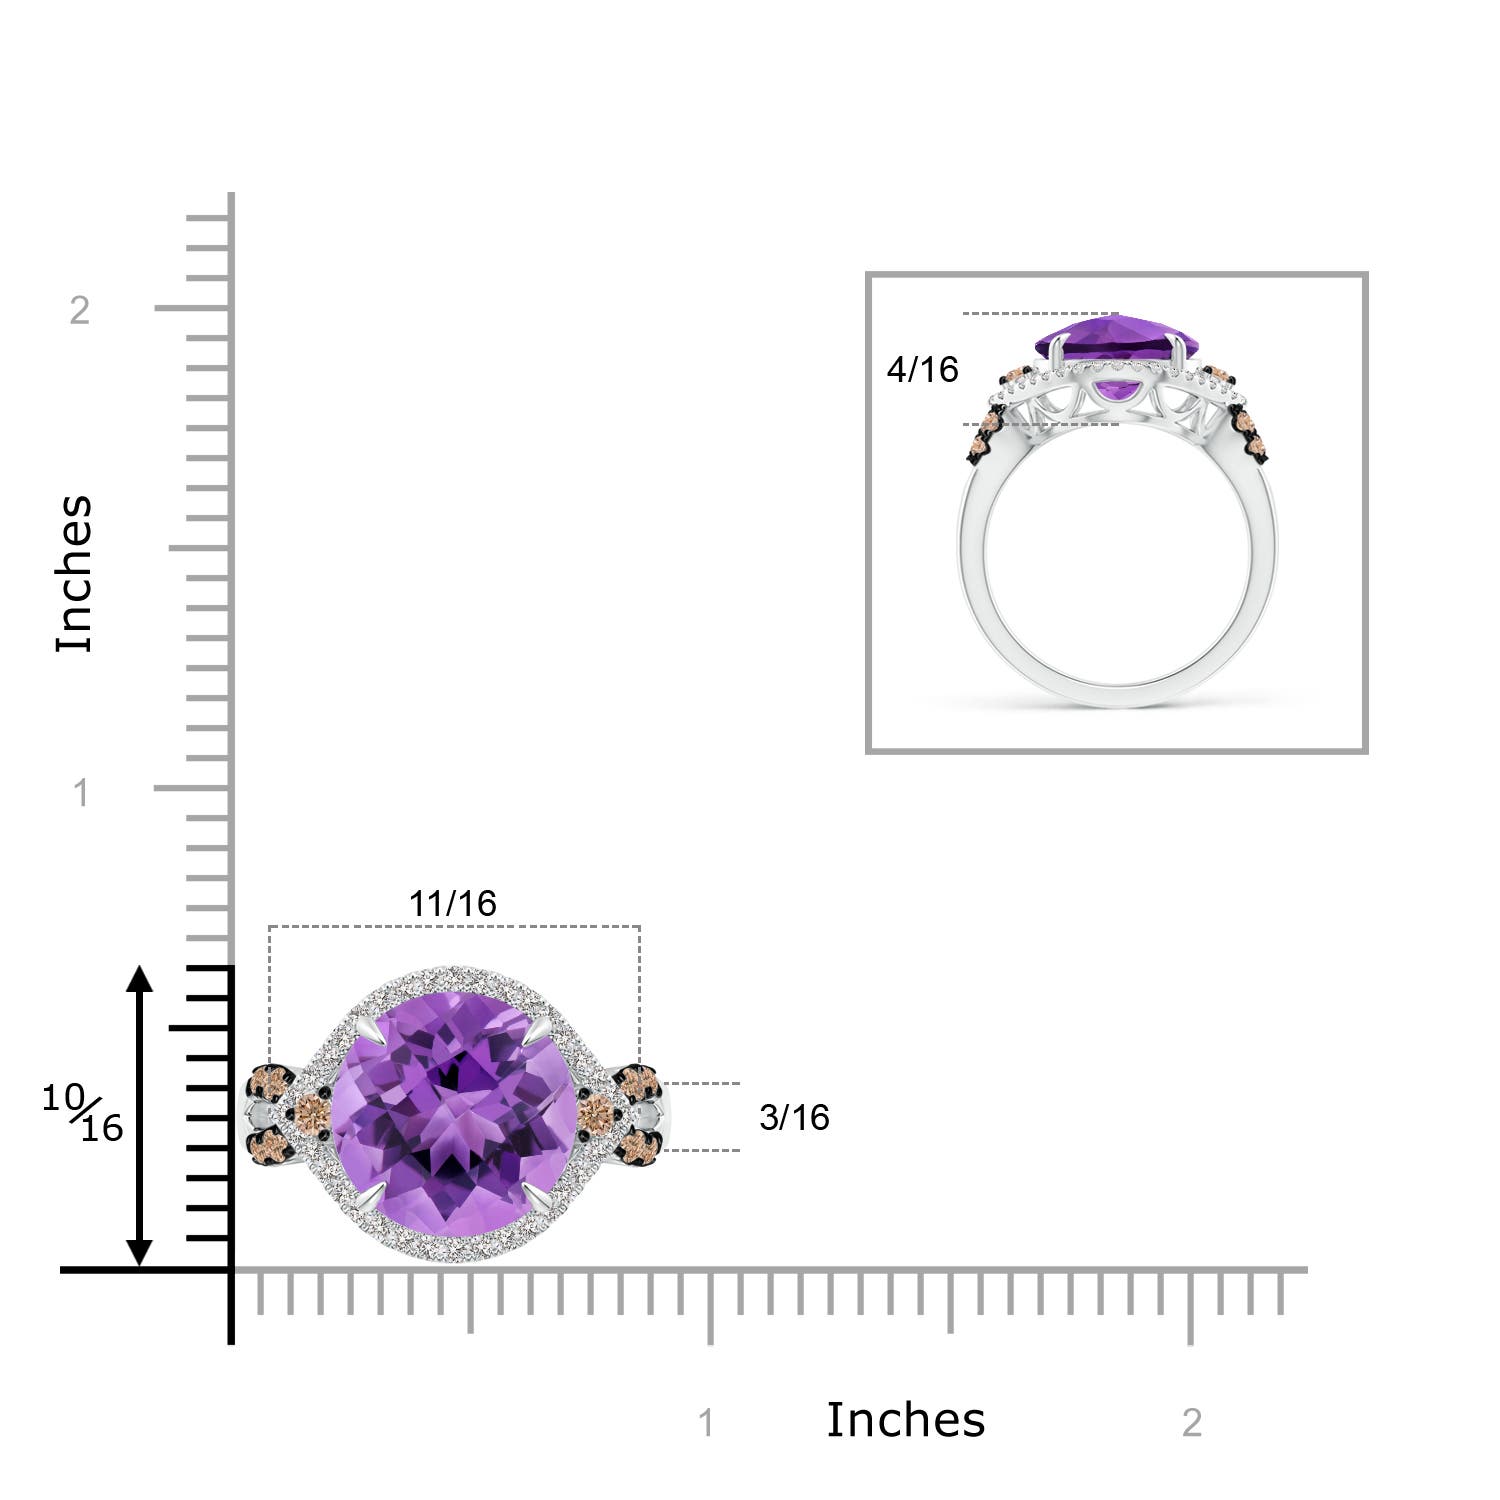 AA - Amethyst / 6.4 CT / 14 KT White Gold